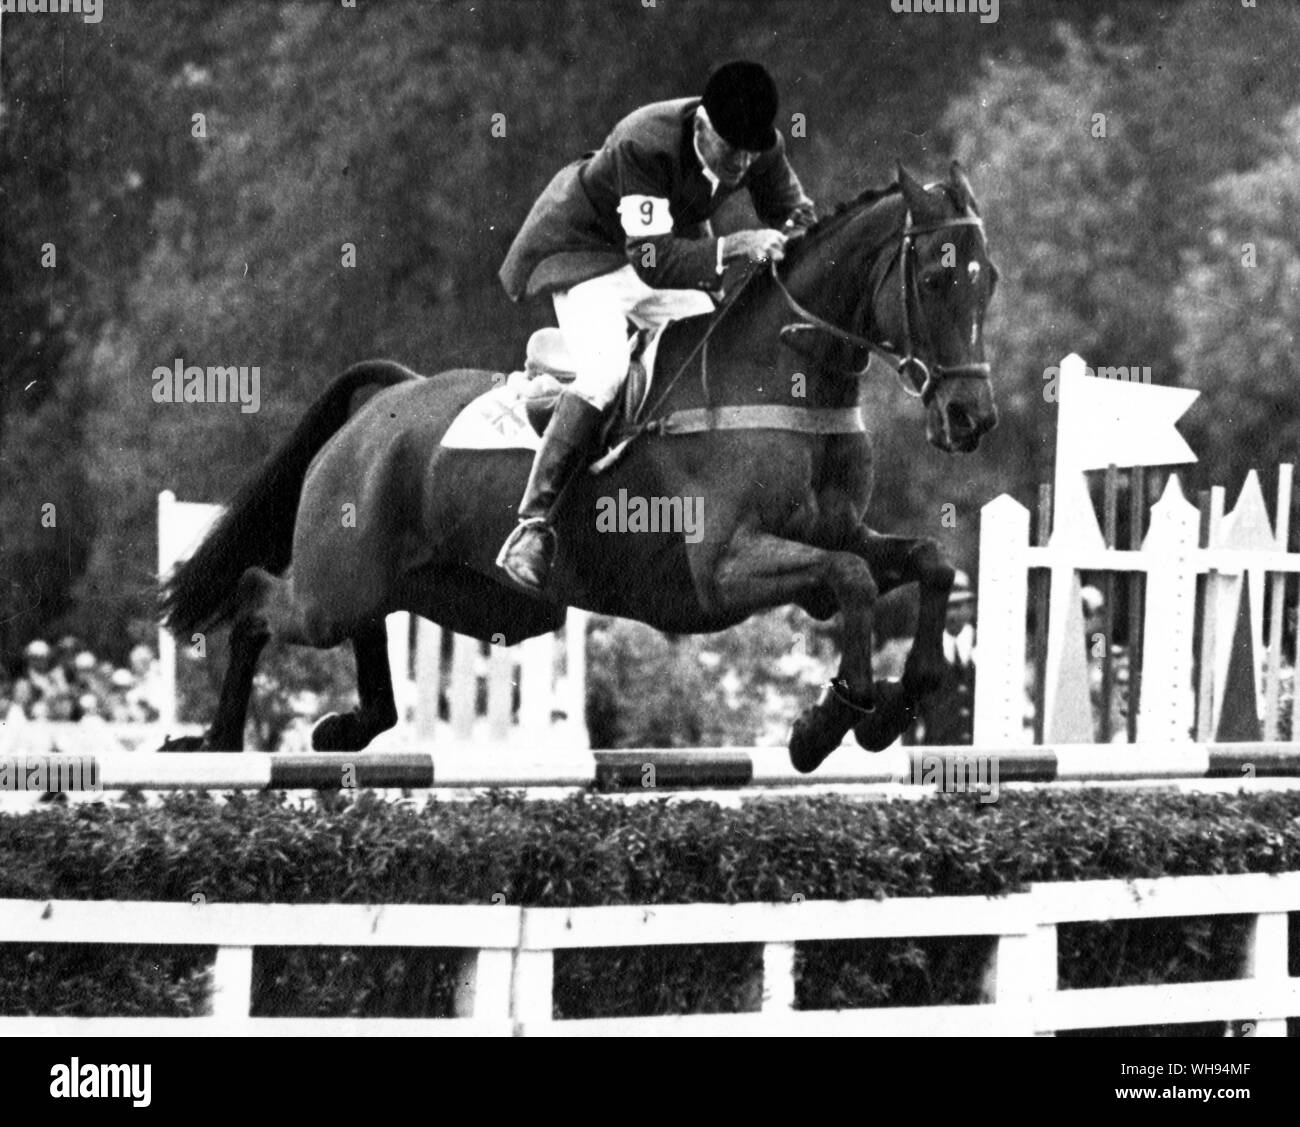 Mexico City Olympics 1968: Major Derek S. Allhusen of Great Britain takes a jump of Lochinvar during today's Olympic equestrian event near Mexico City. The British 4-man team won gold medals for the 3-day team event.. Stock Photo